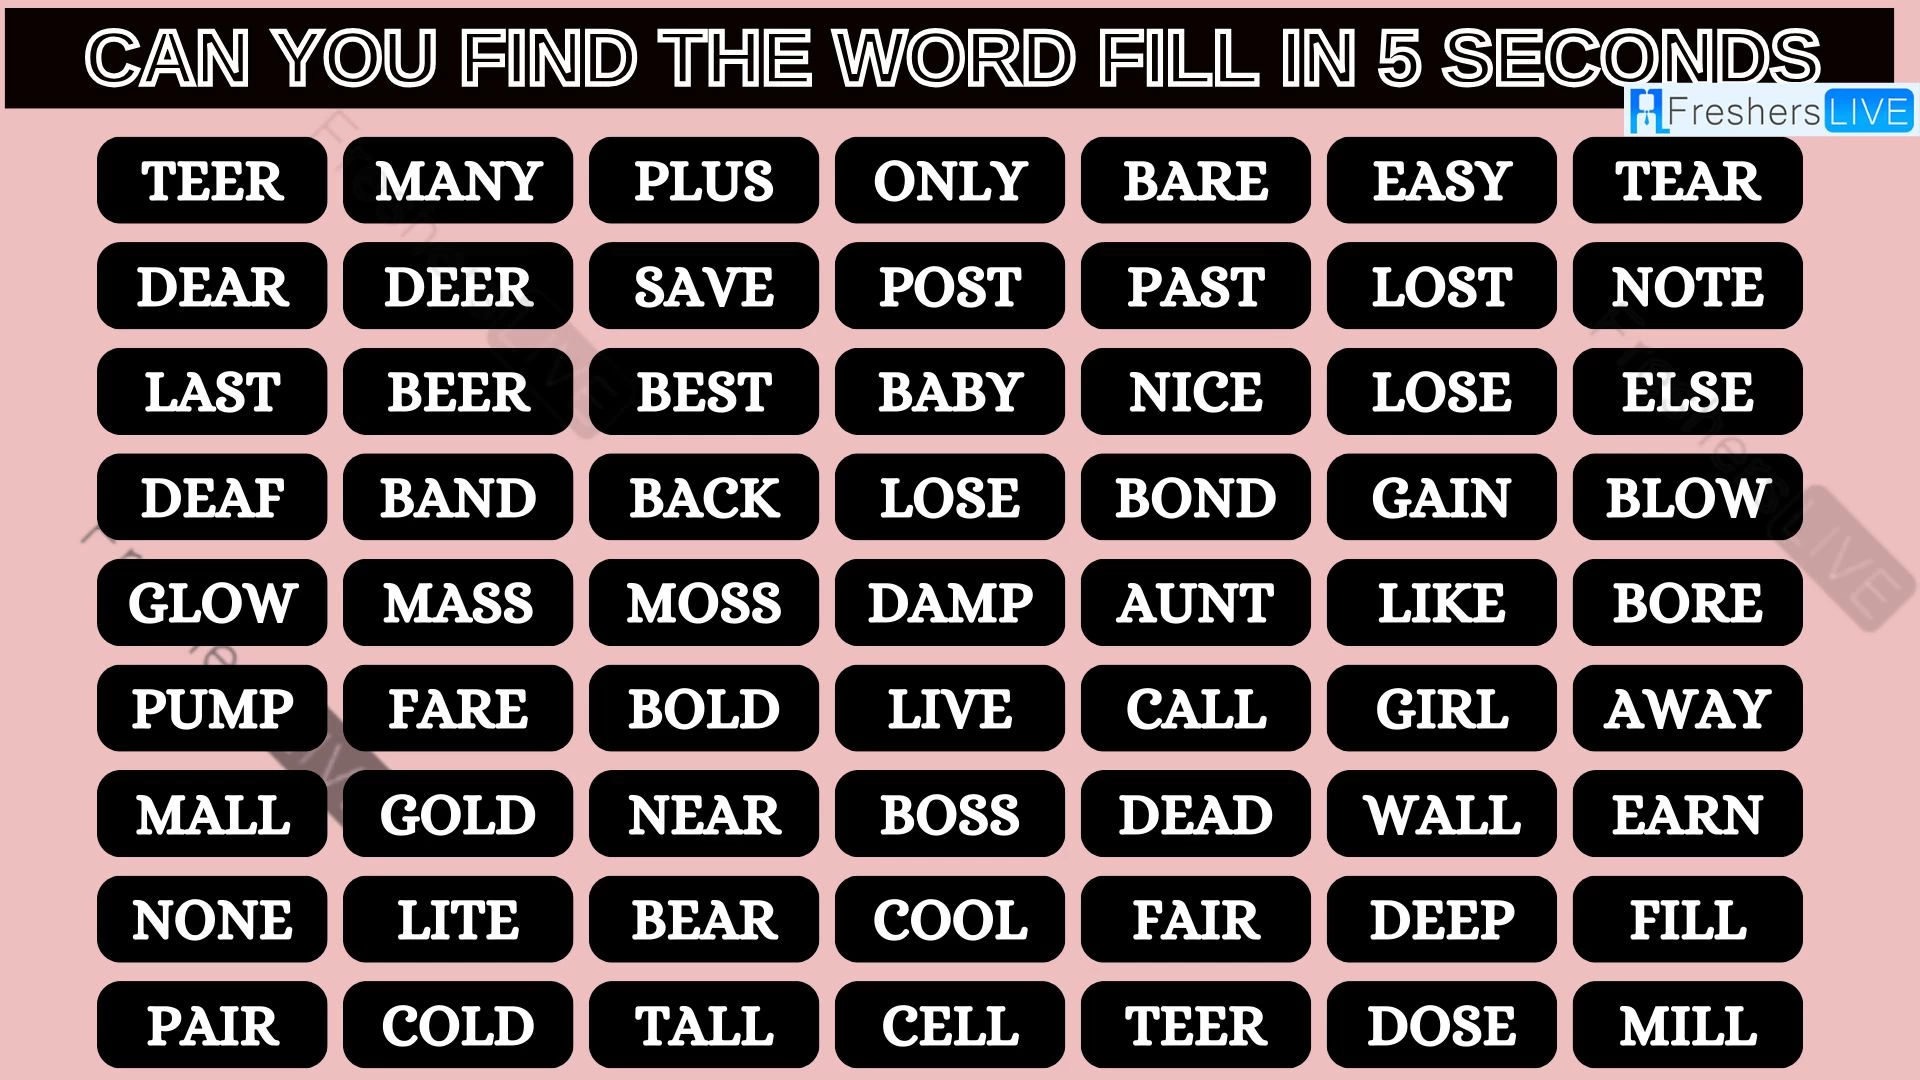 Only 20/20 HD Vision People Can Find the Word Fill in 5 Seconds